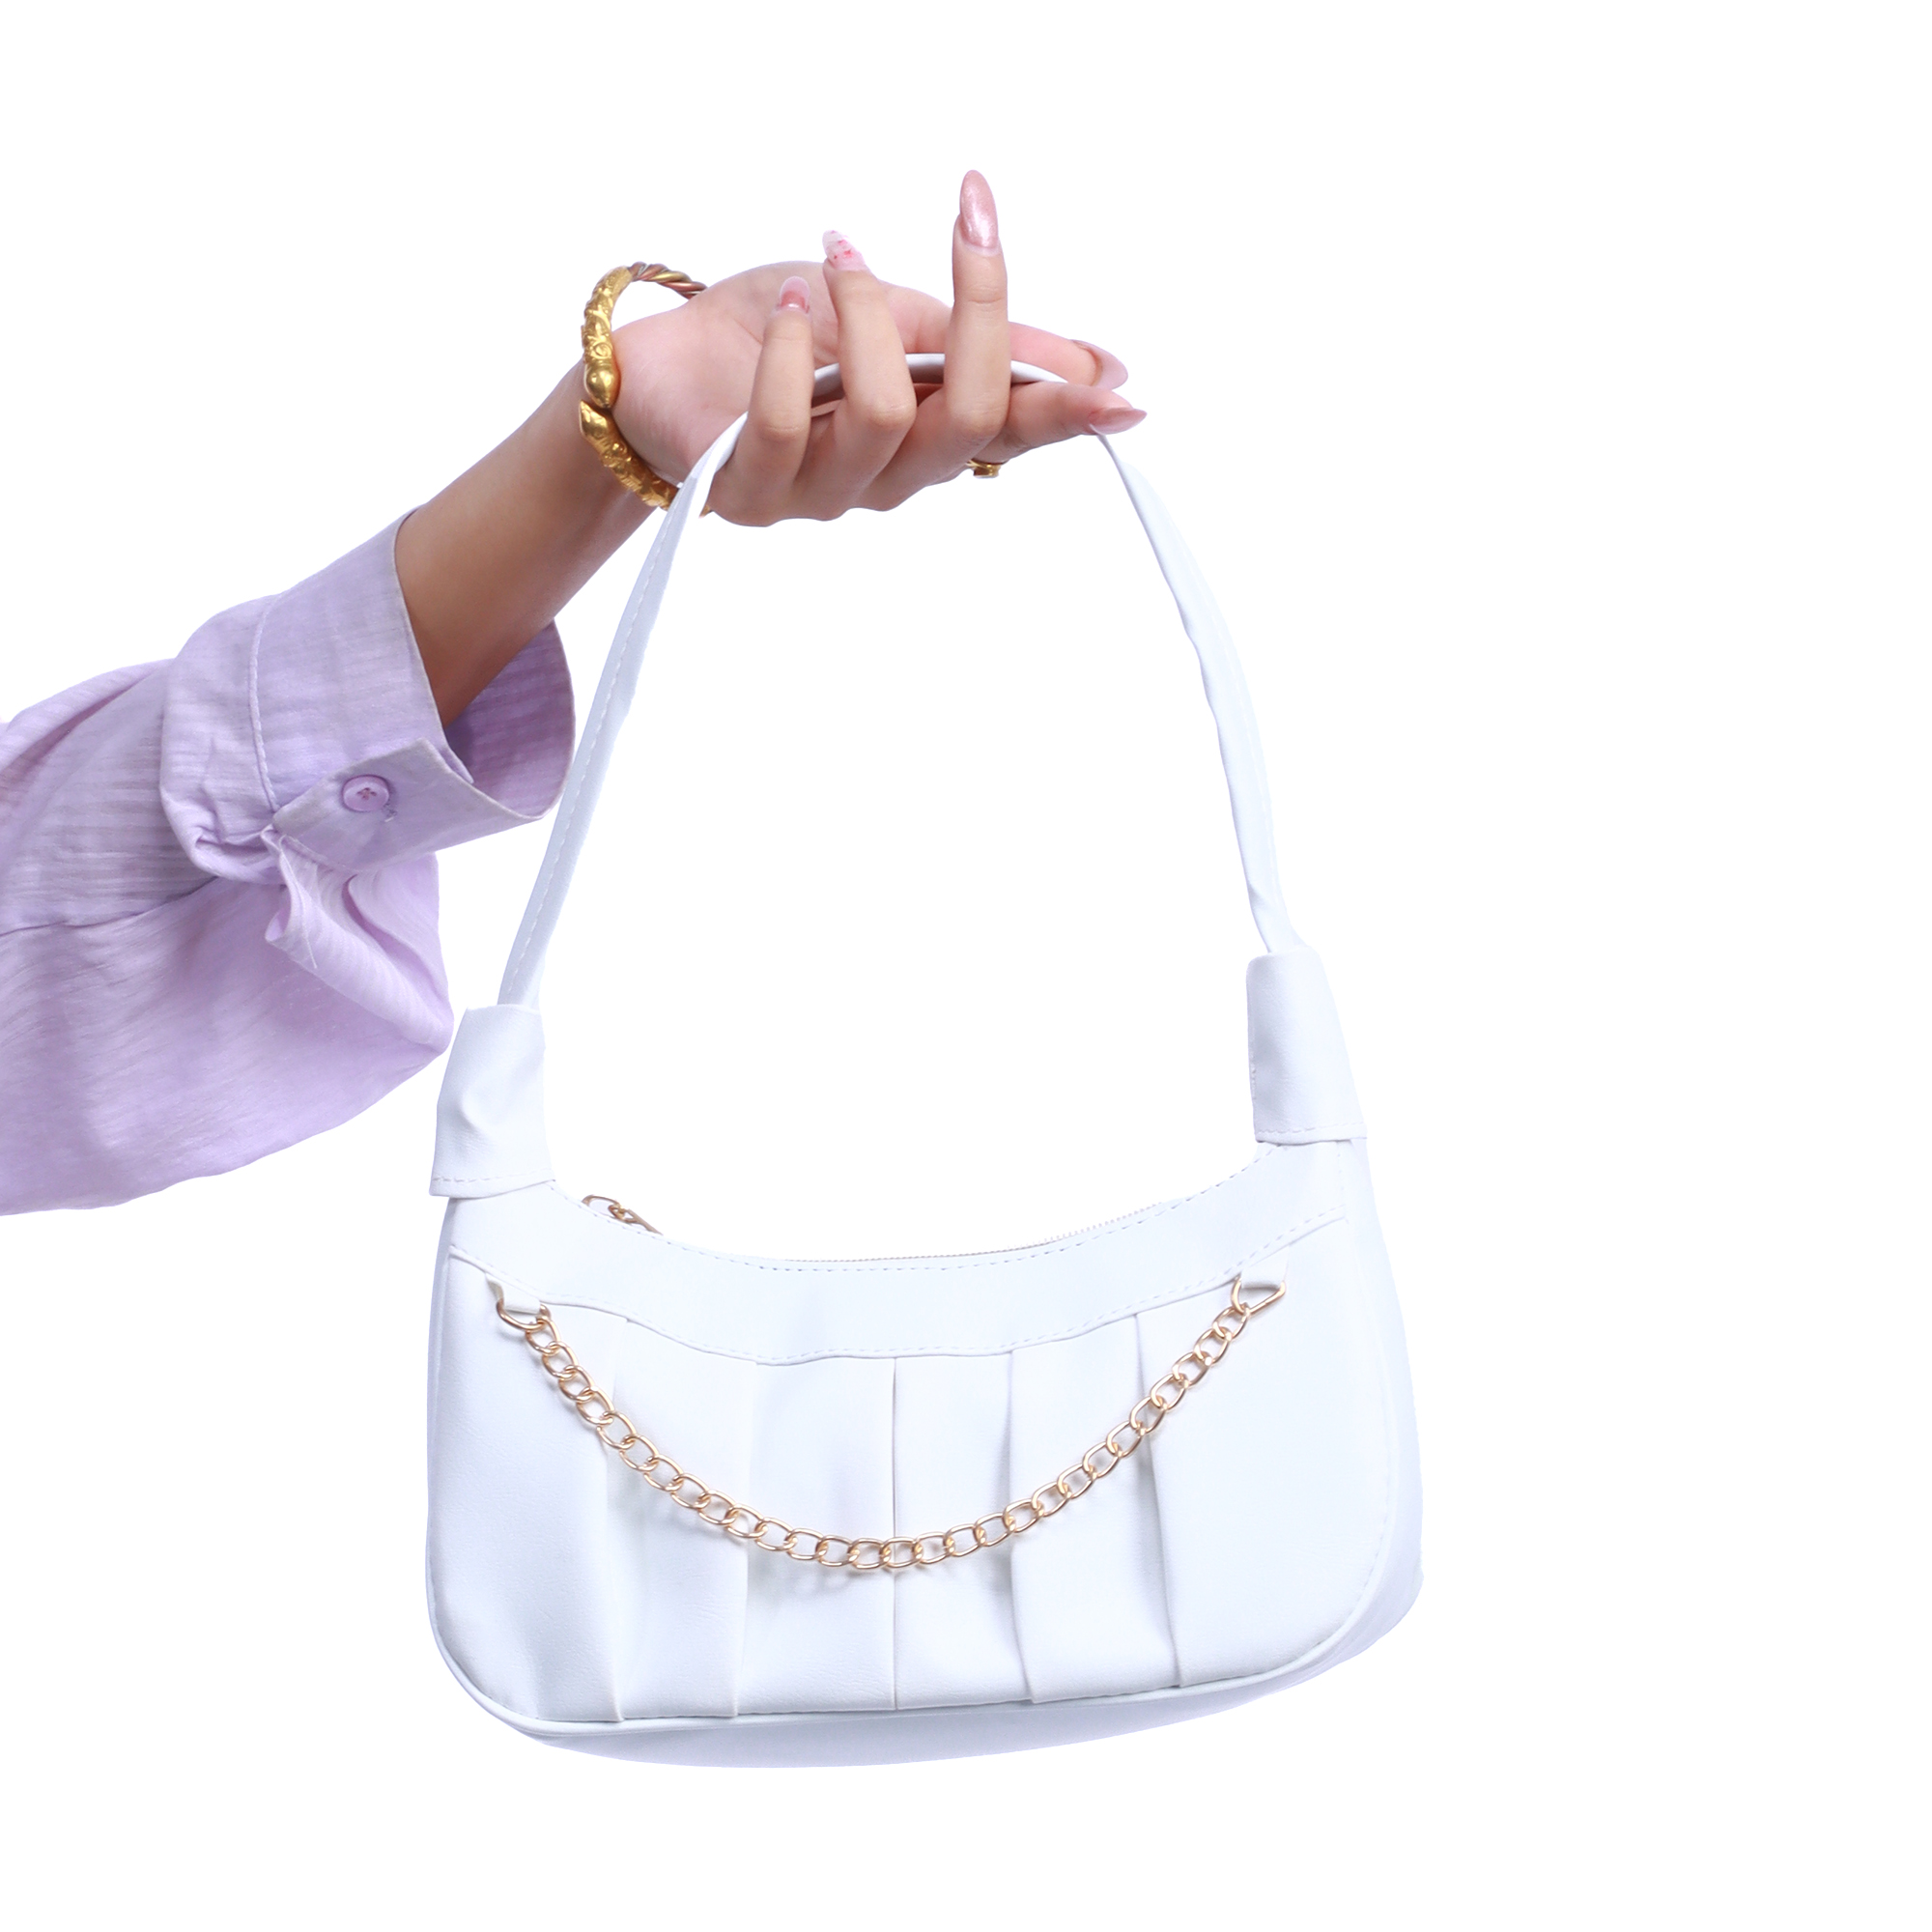 Cheap Purses Clearance 60% Off Summer Handbag Messenger Large Capacity Two  Piece Candy Color Womens Bags Outlet Online From Loixoox, $18.37 |  DHgate.Com